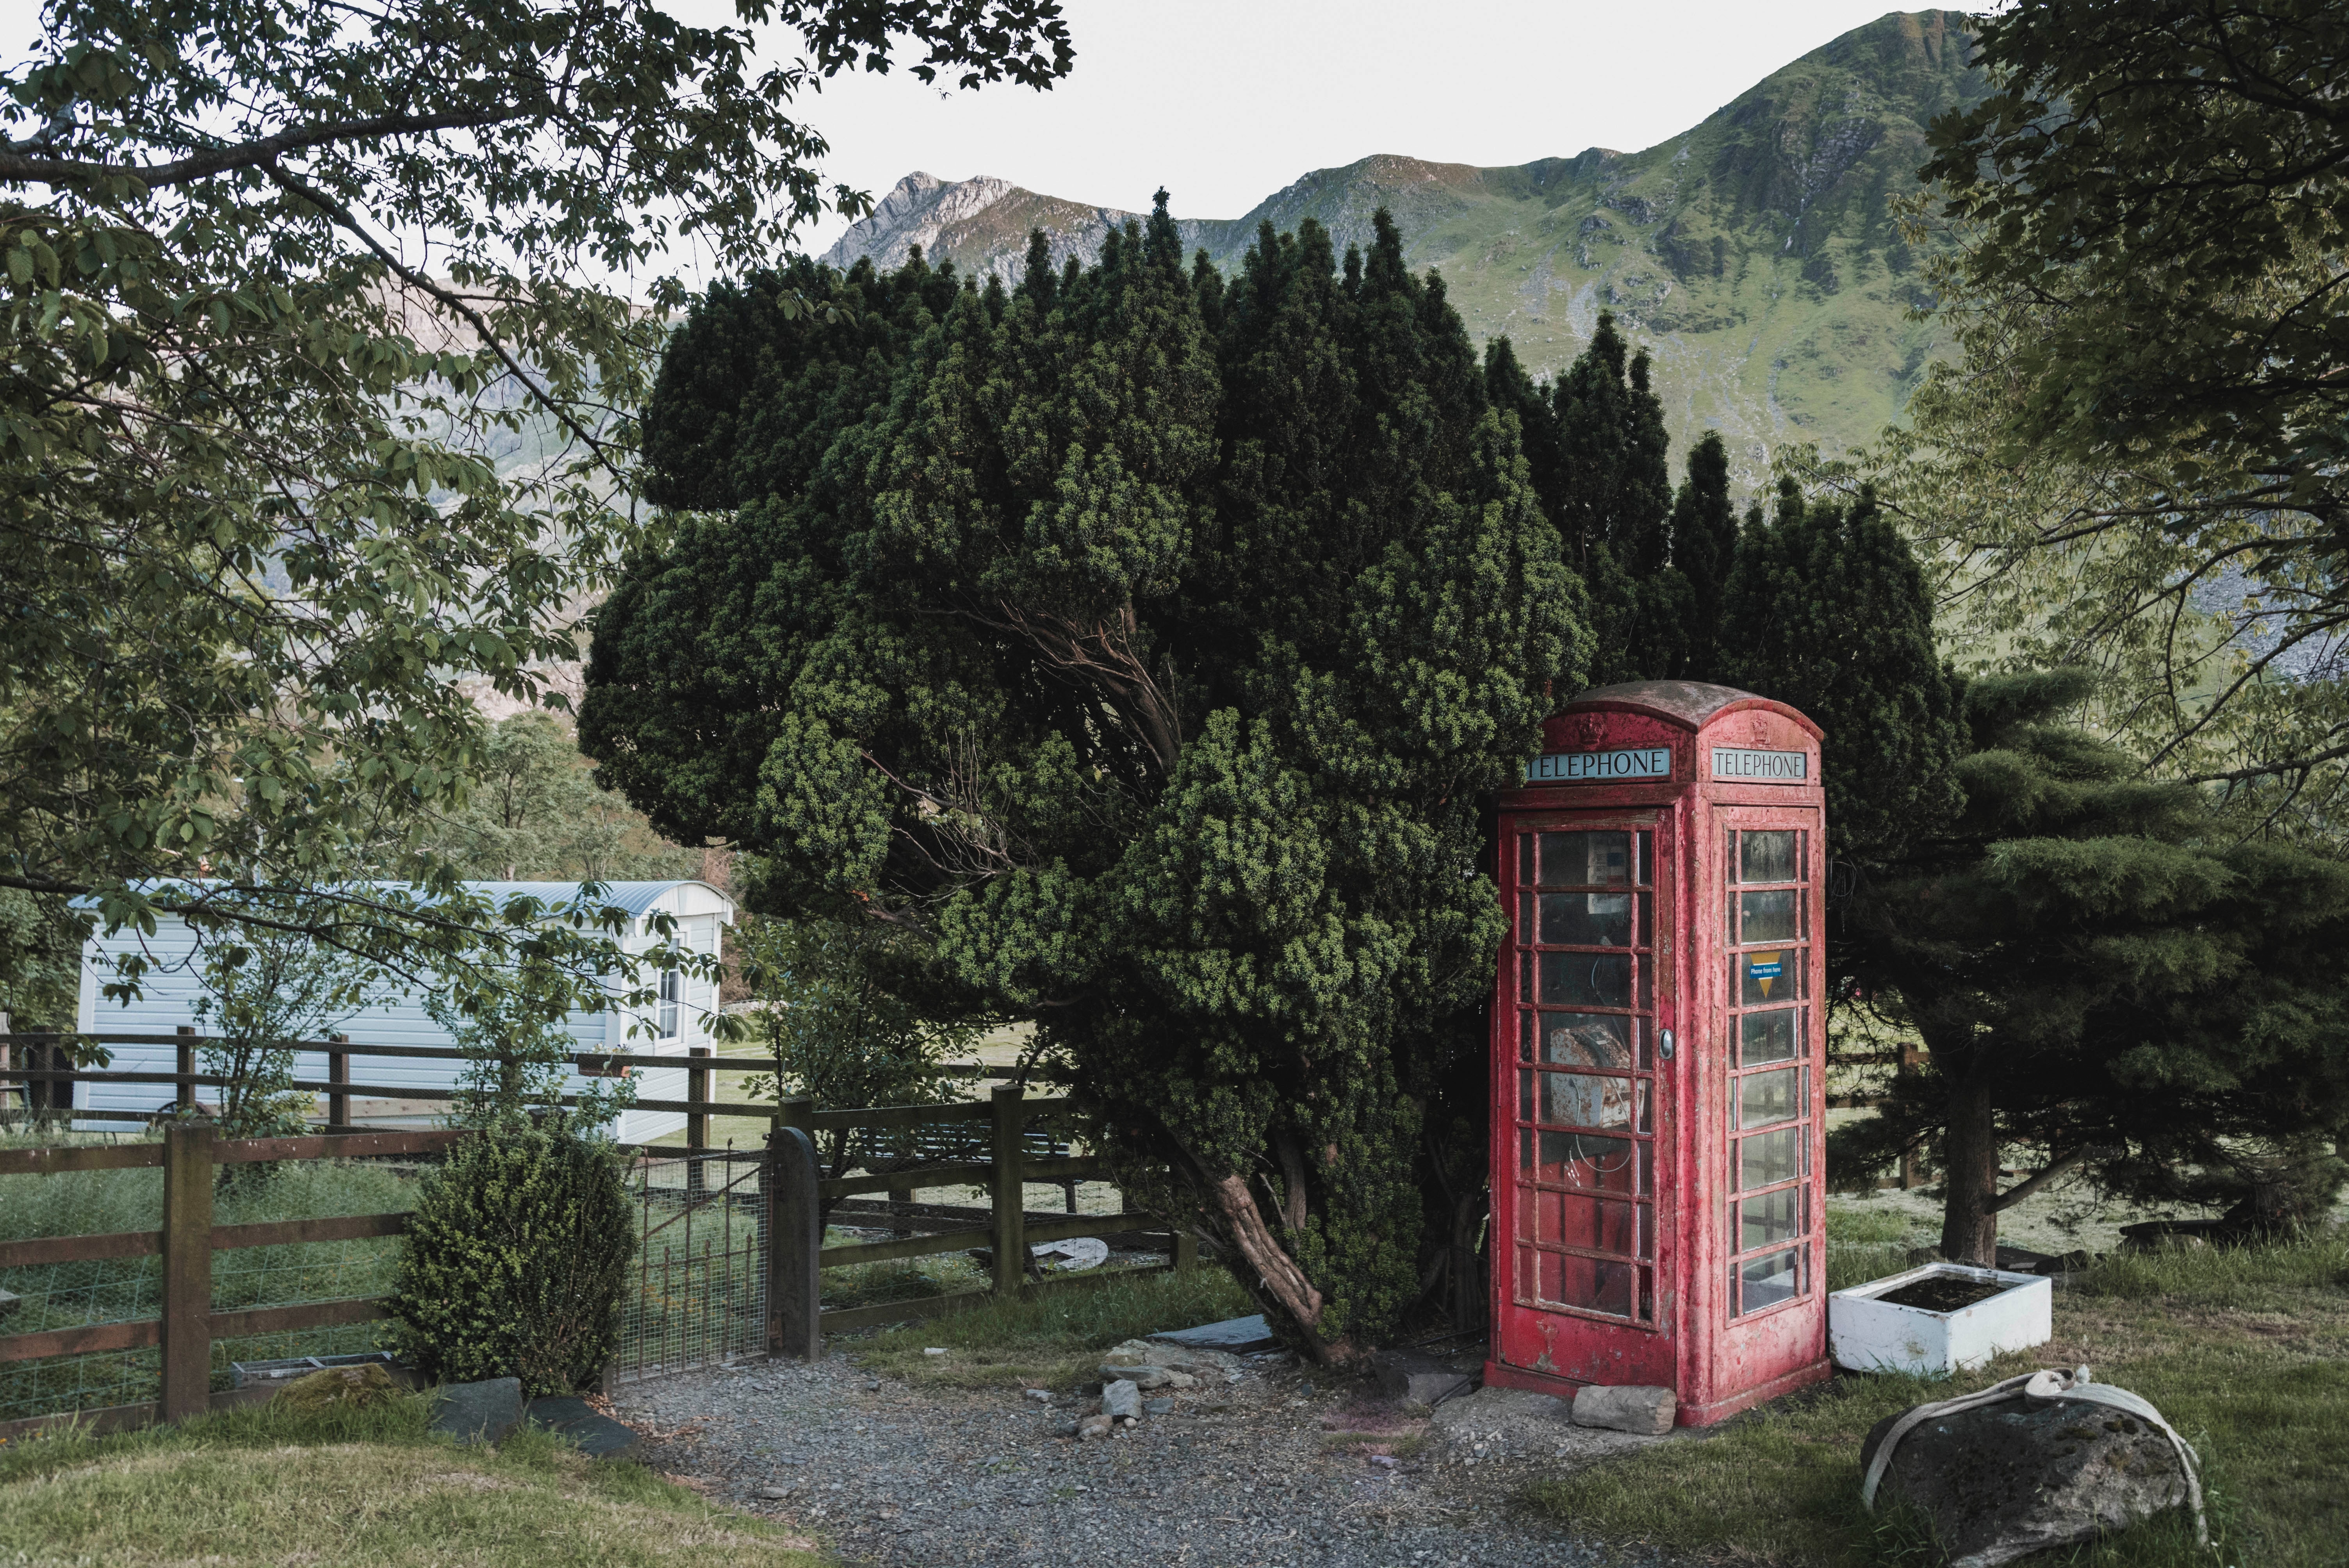 A red phone booth in the country